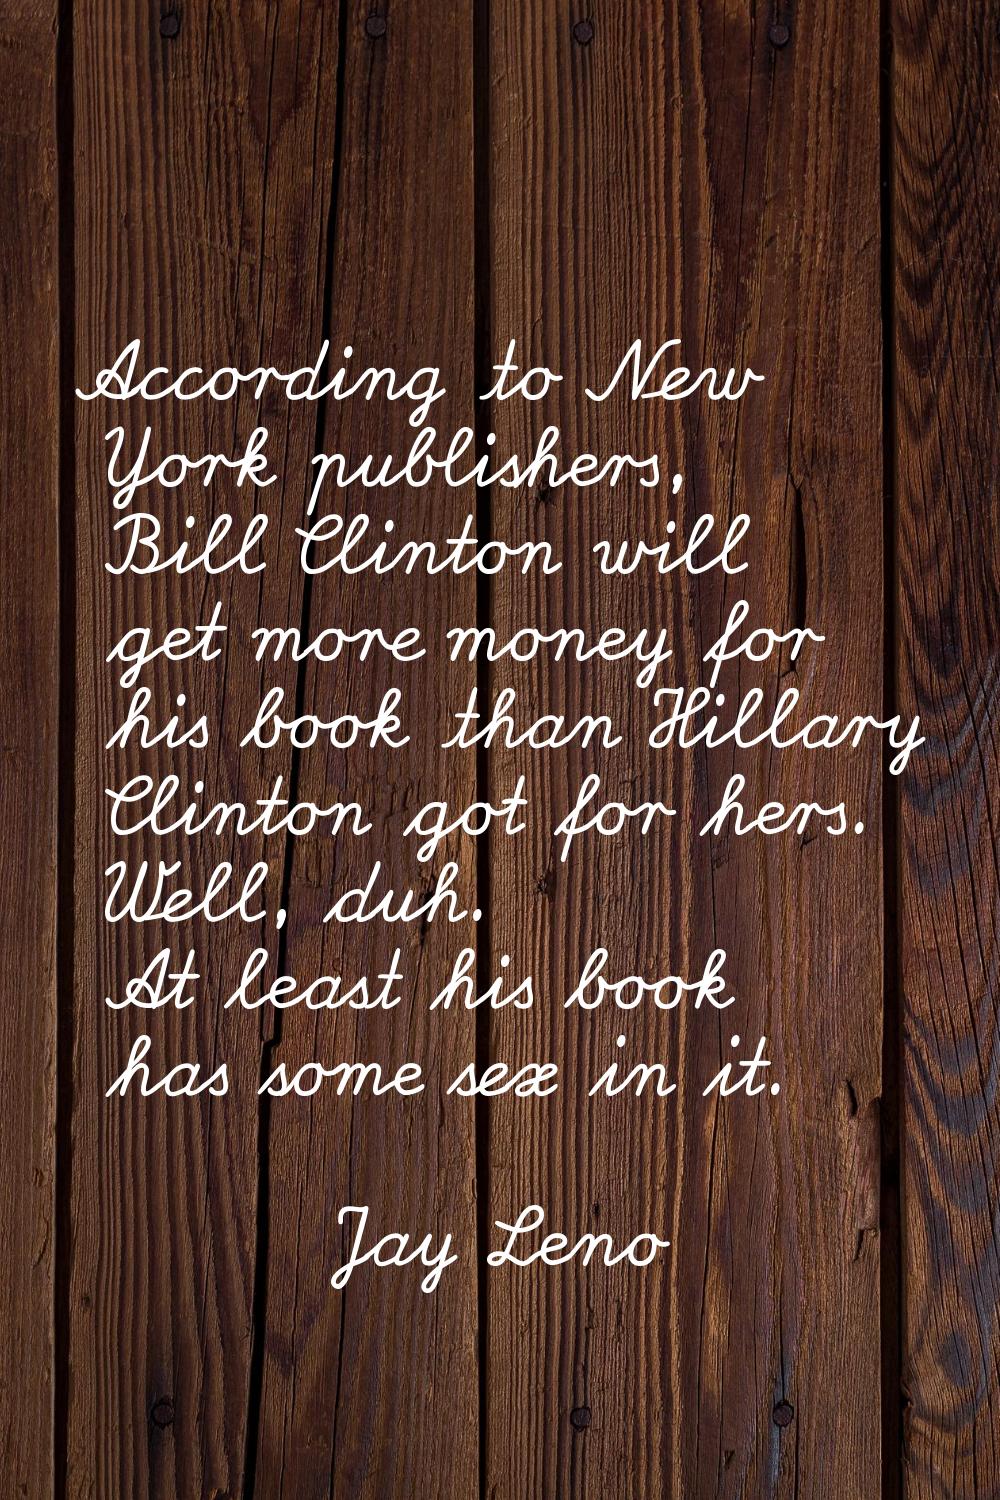 According to New York publishers, Bill Clinton will get more money for his book than Hillary Clinto